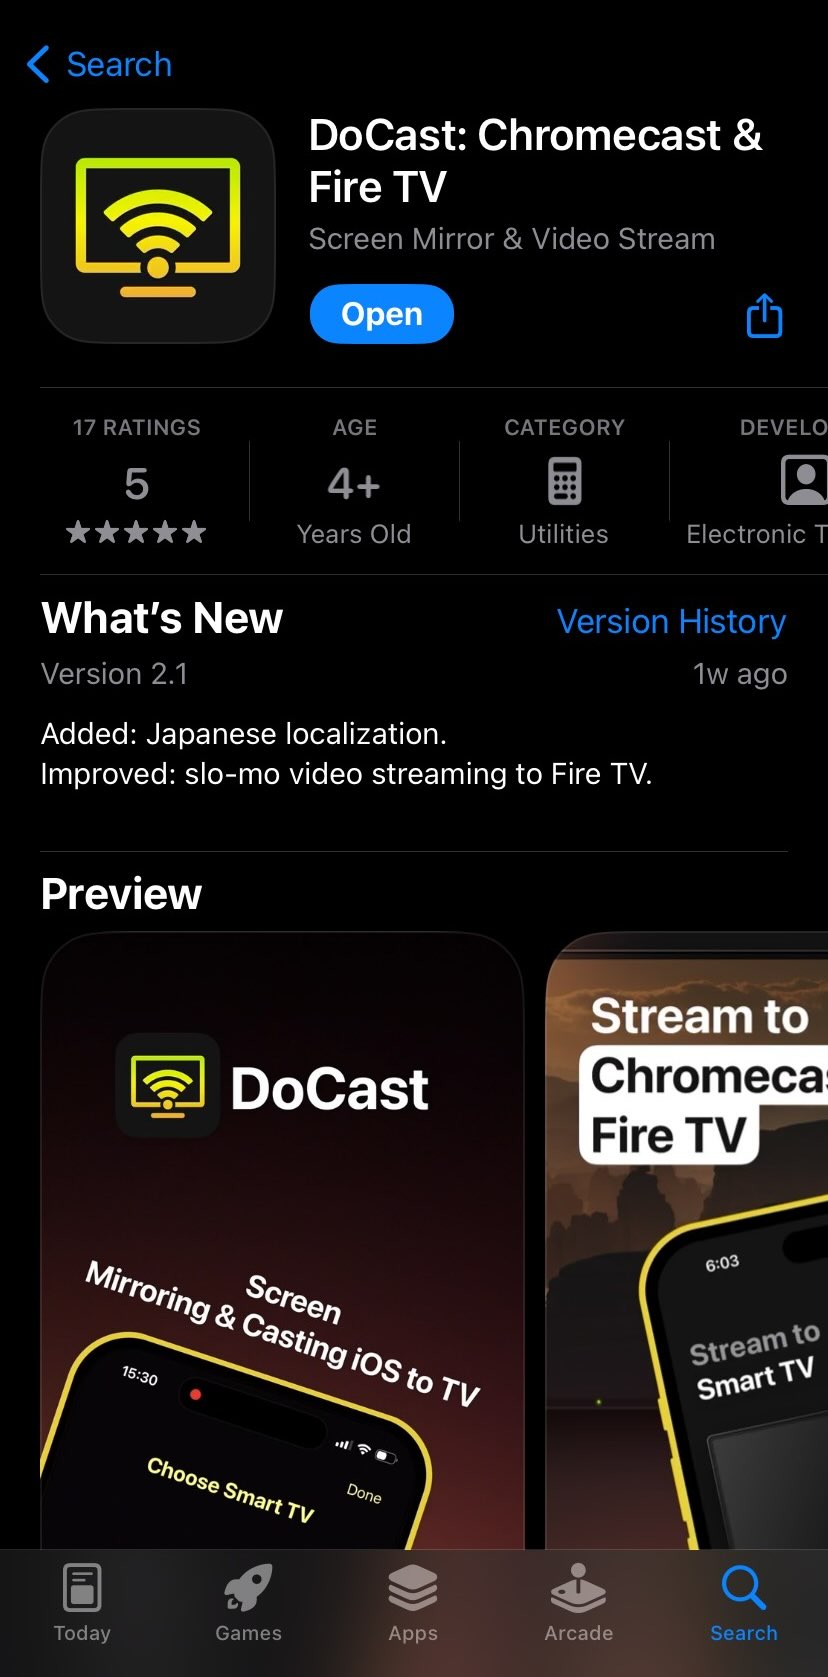 Download DoCast from the App Store